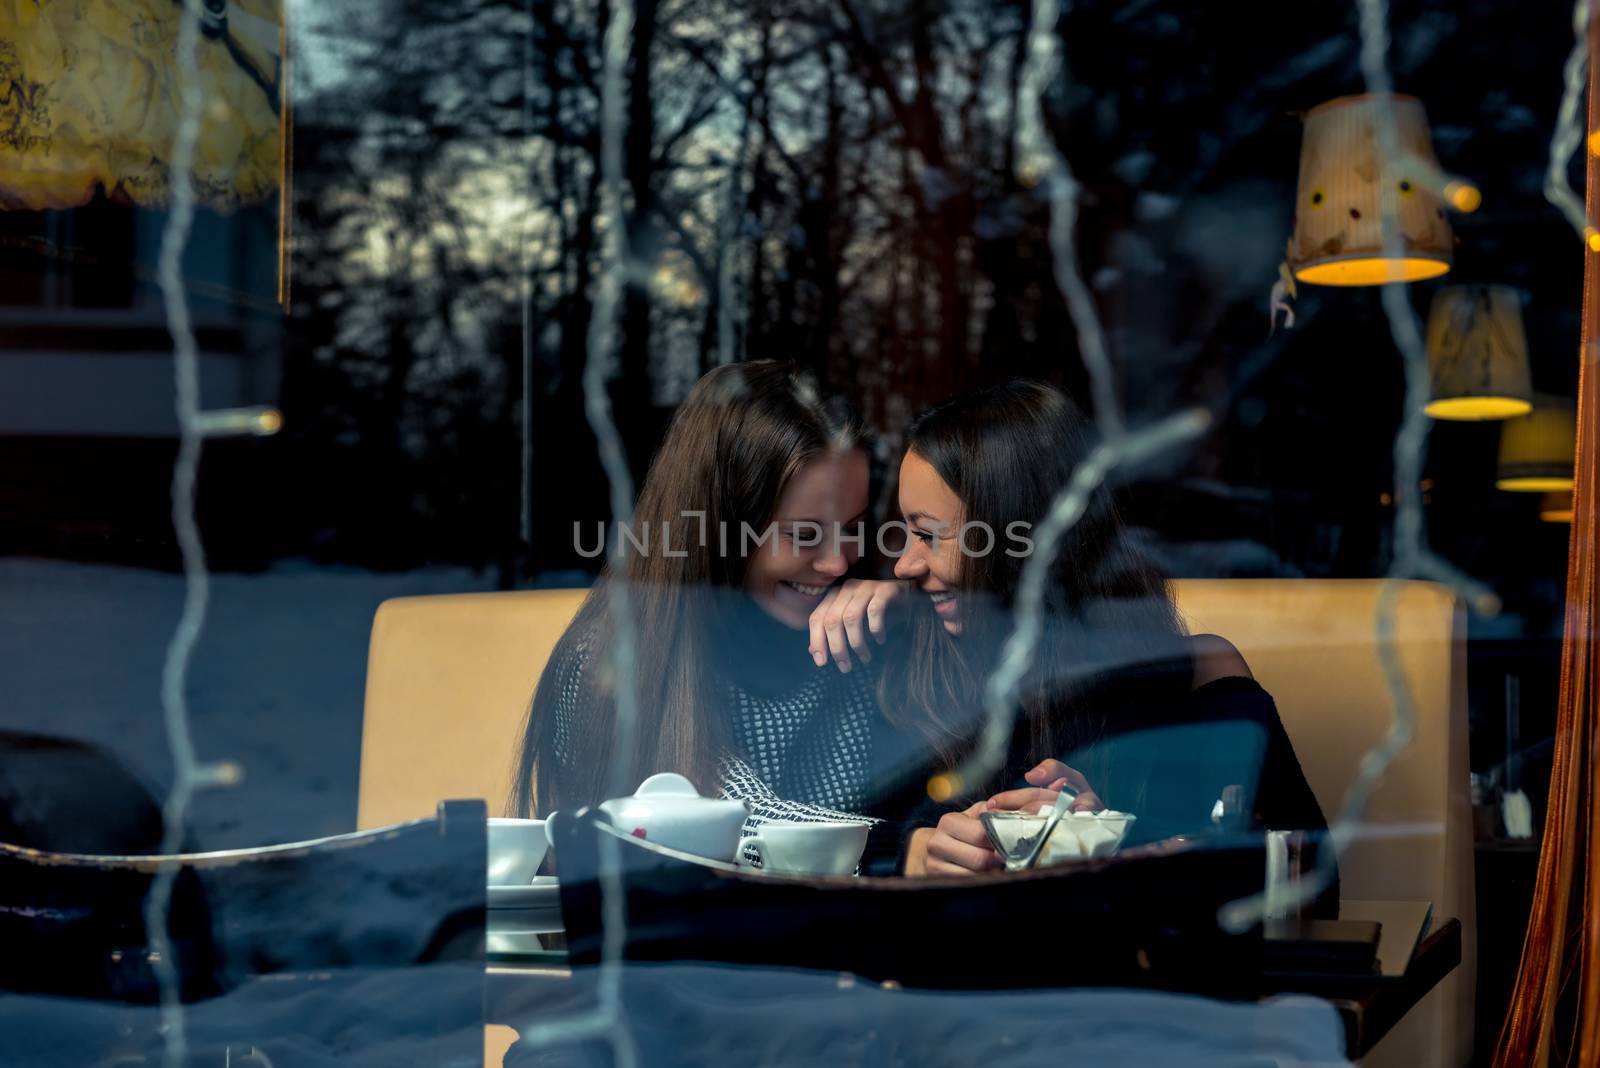 Merry girlfriends, meeting in a cafe, shooting behind a glass